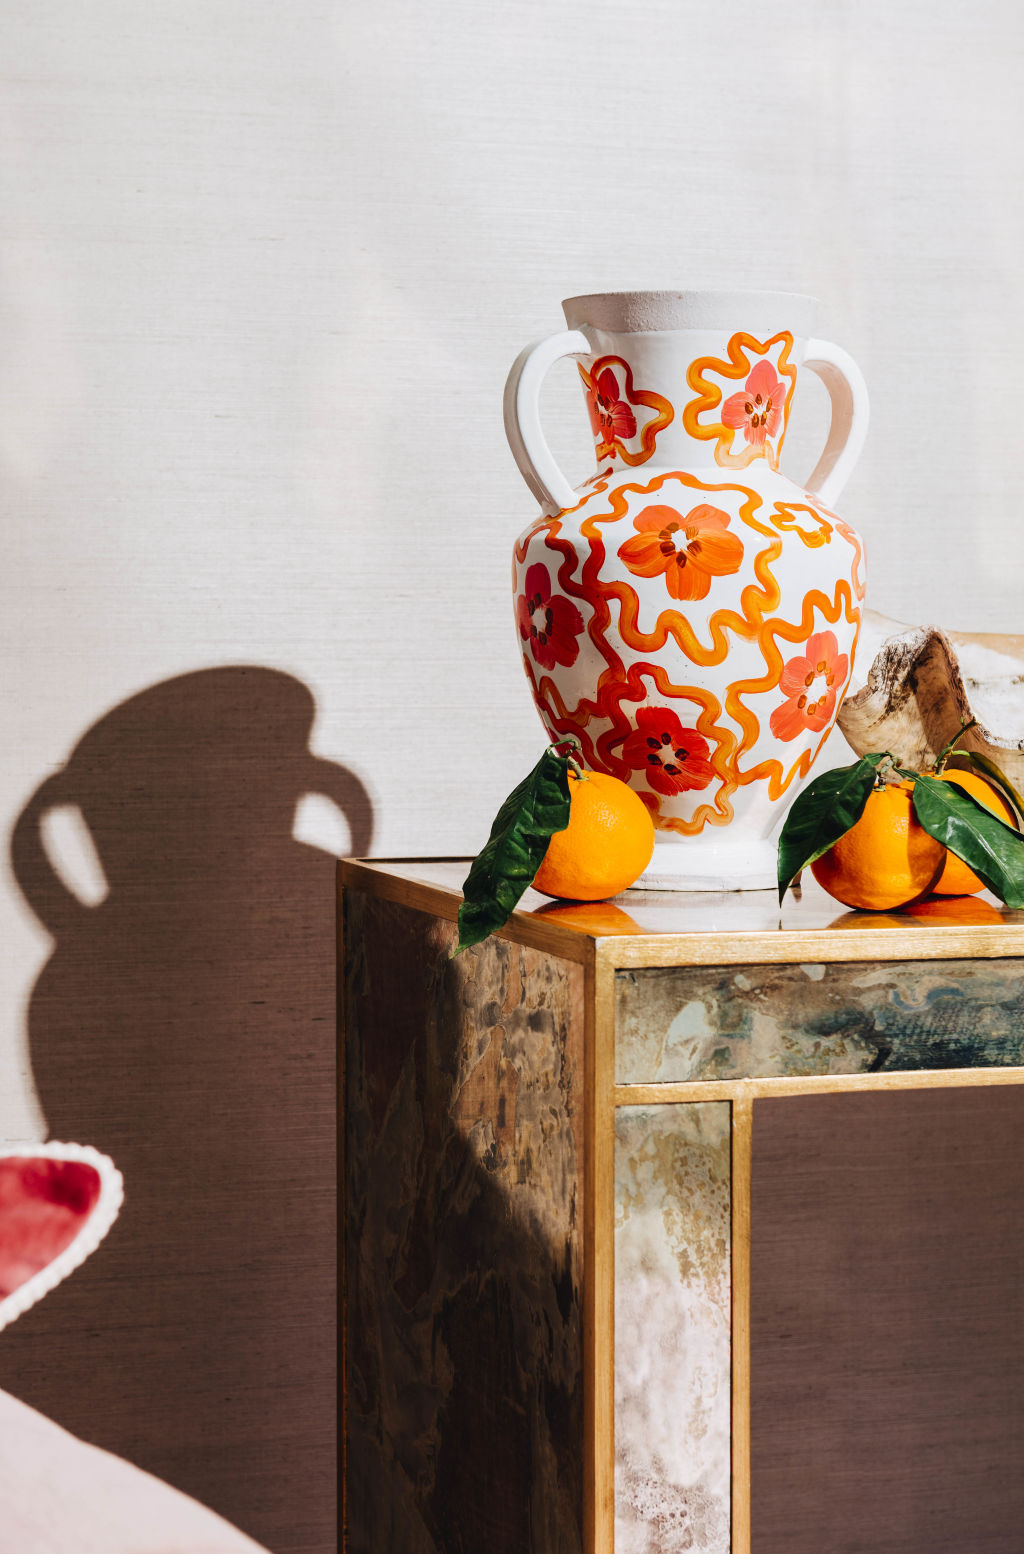 Marguerite Amber Vase by Bonnie and Neil. Photo: Supplied